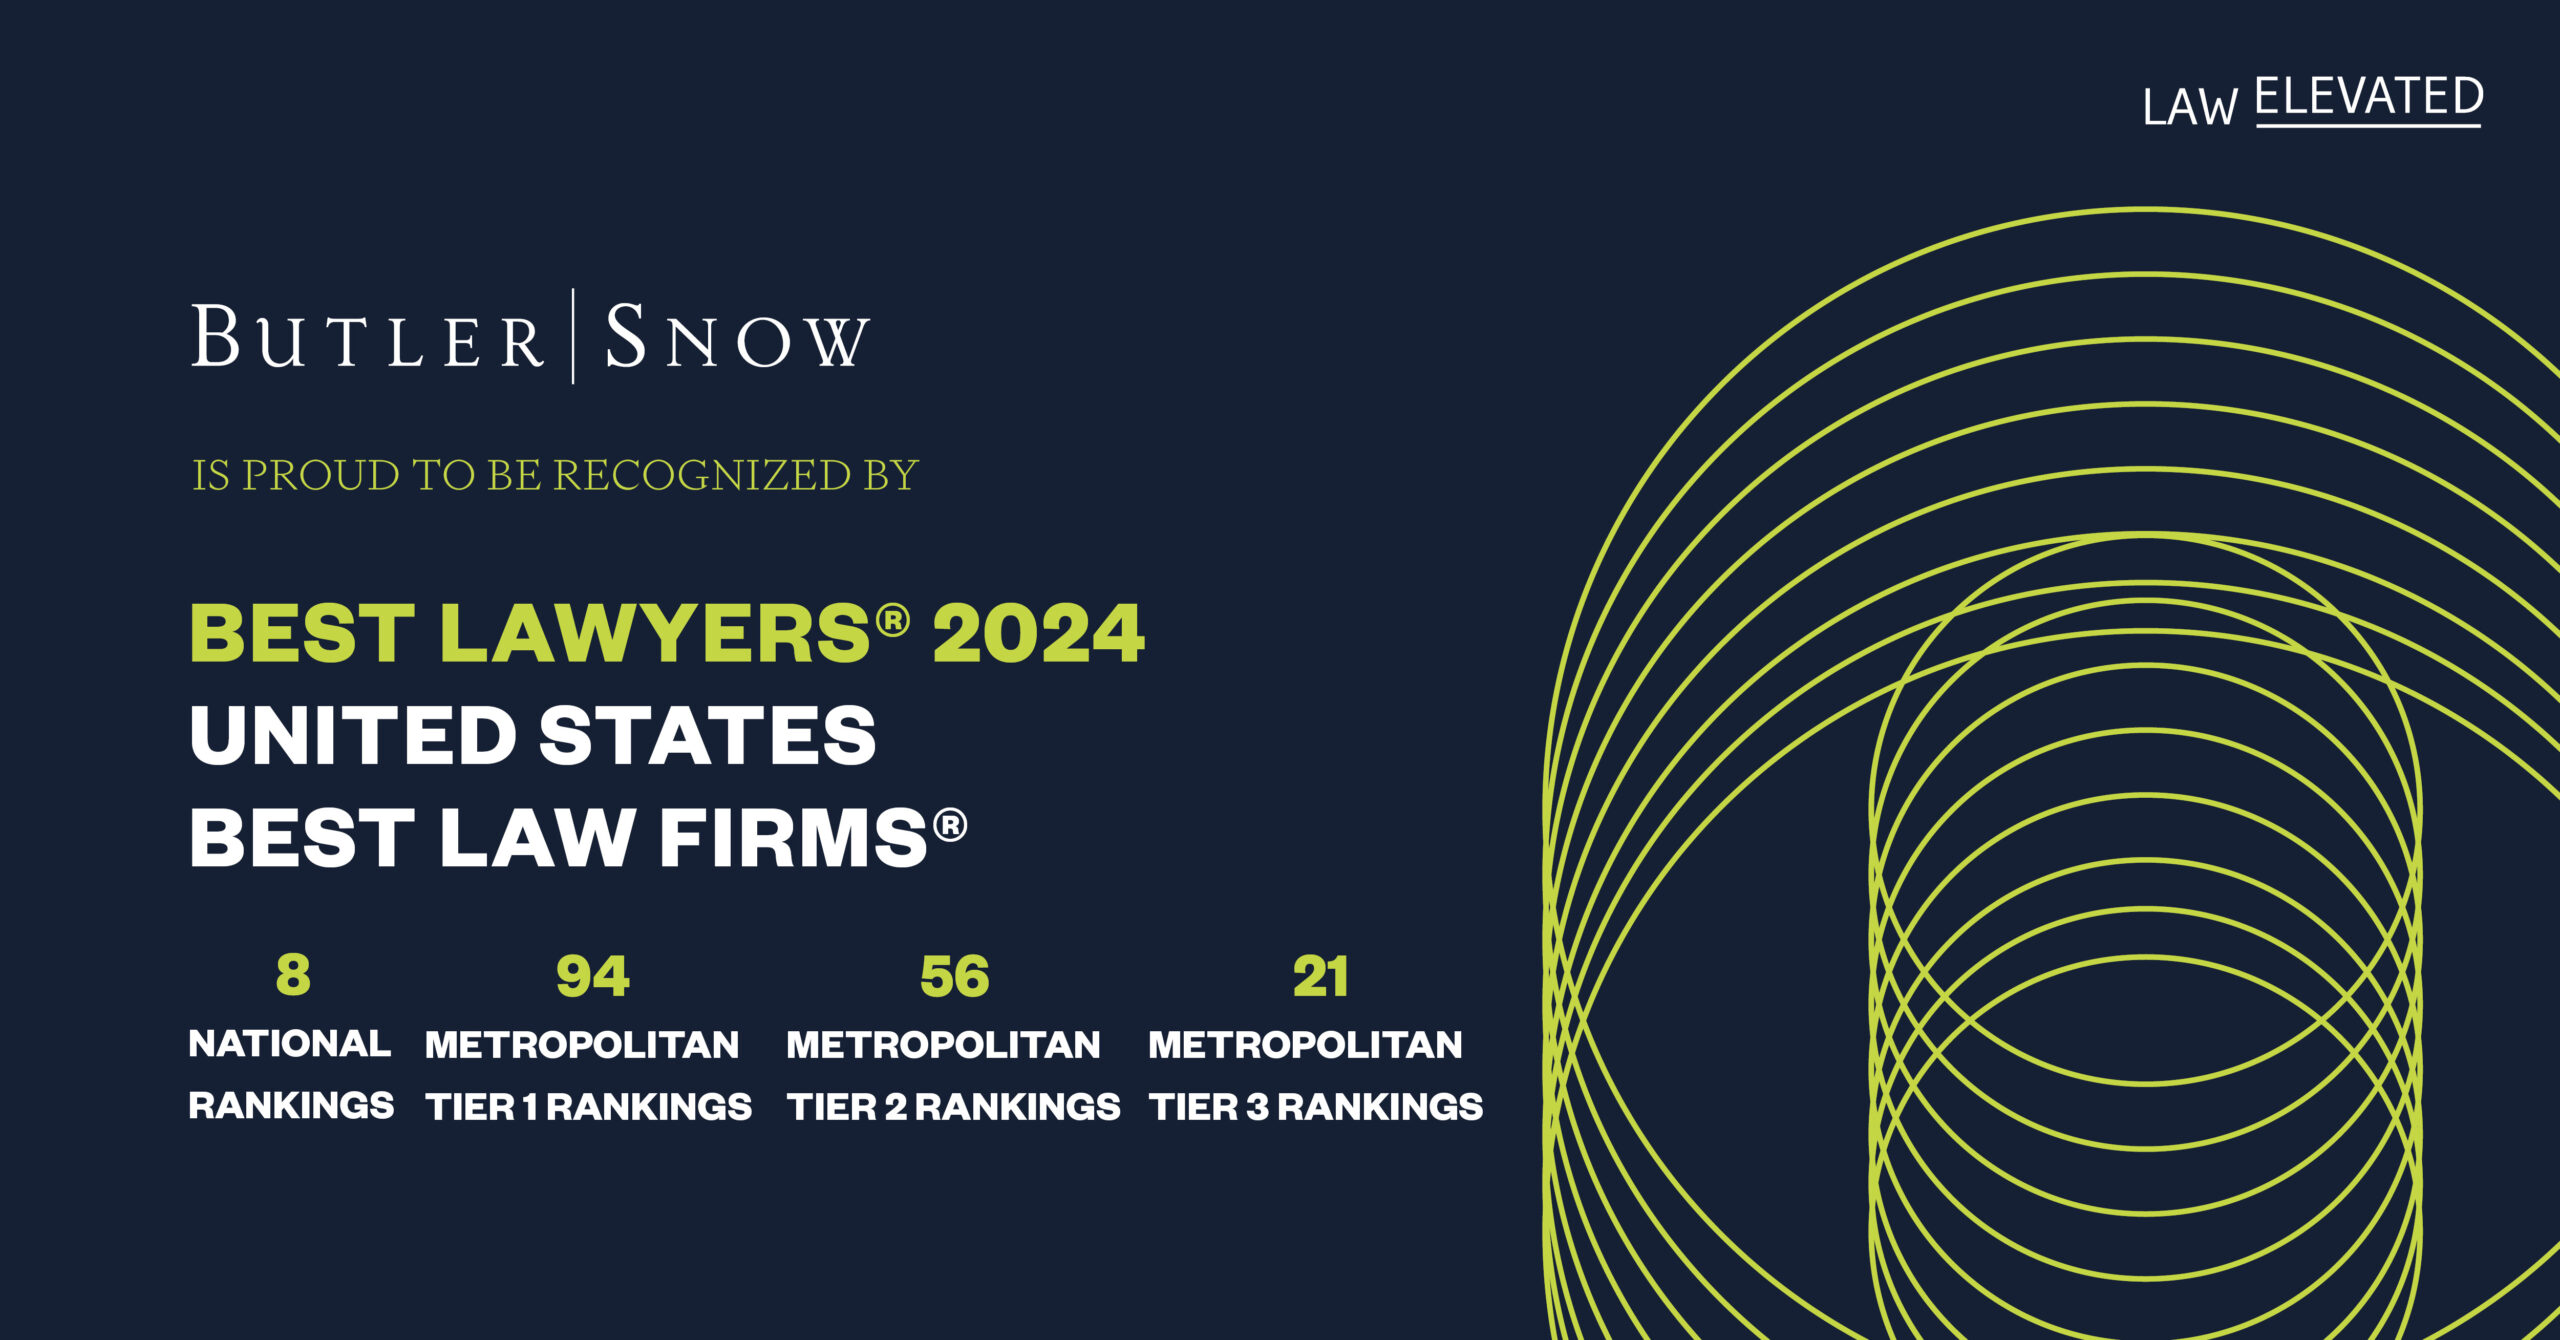 Best Lawyers® Recognizes Butler Snow in 2024 United States Best Law Firms® Rankings (14th Edition)